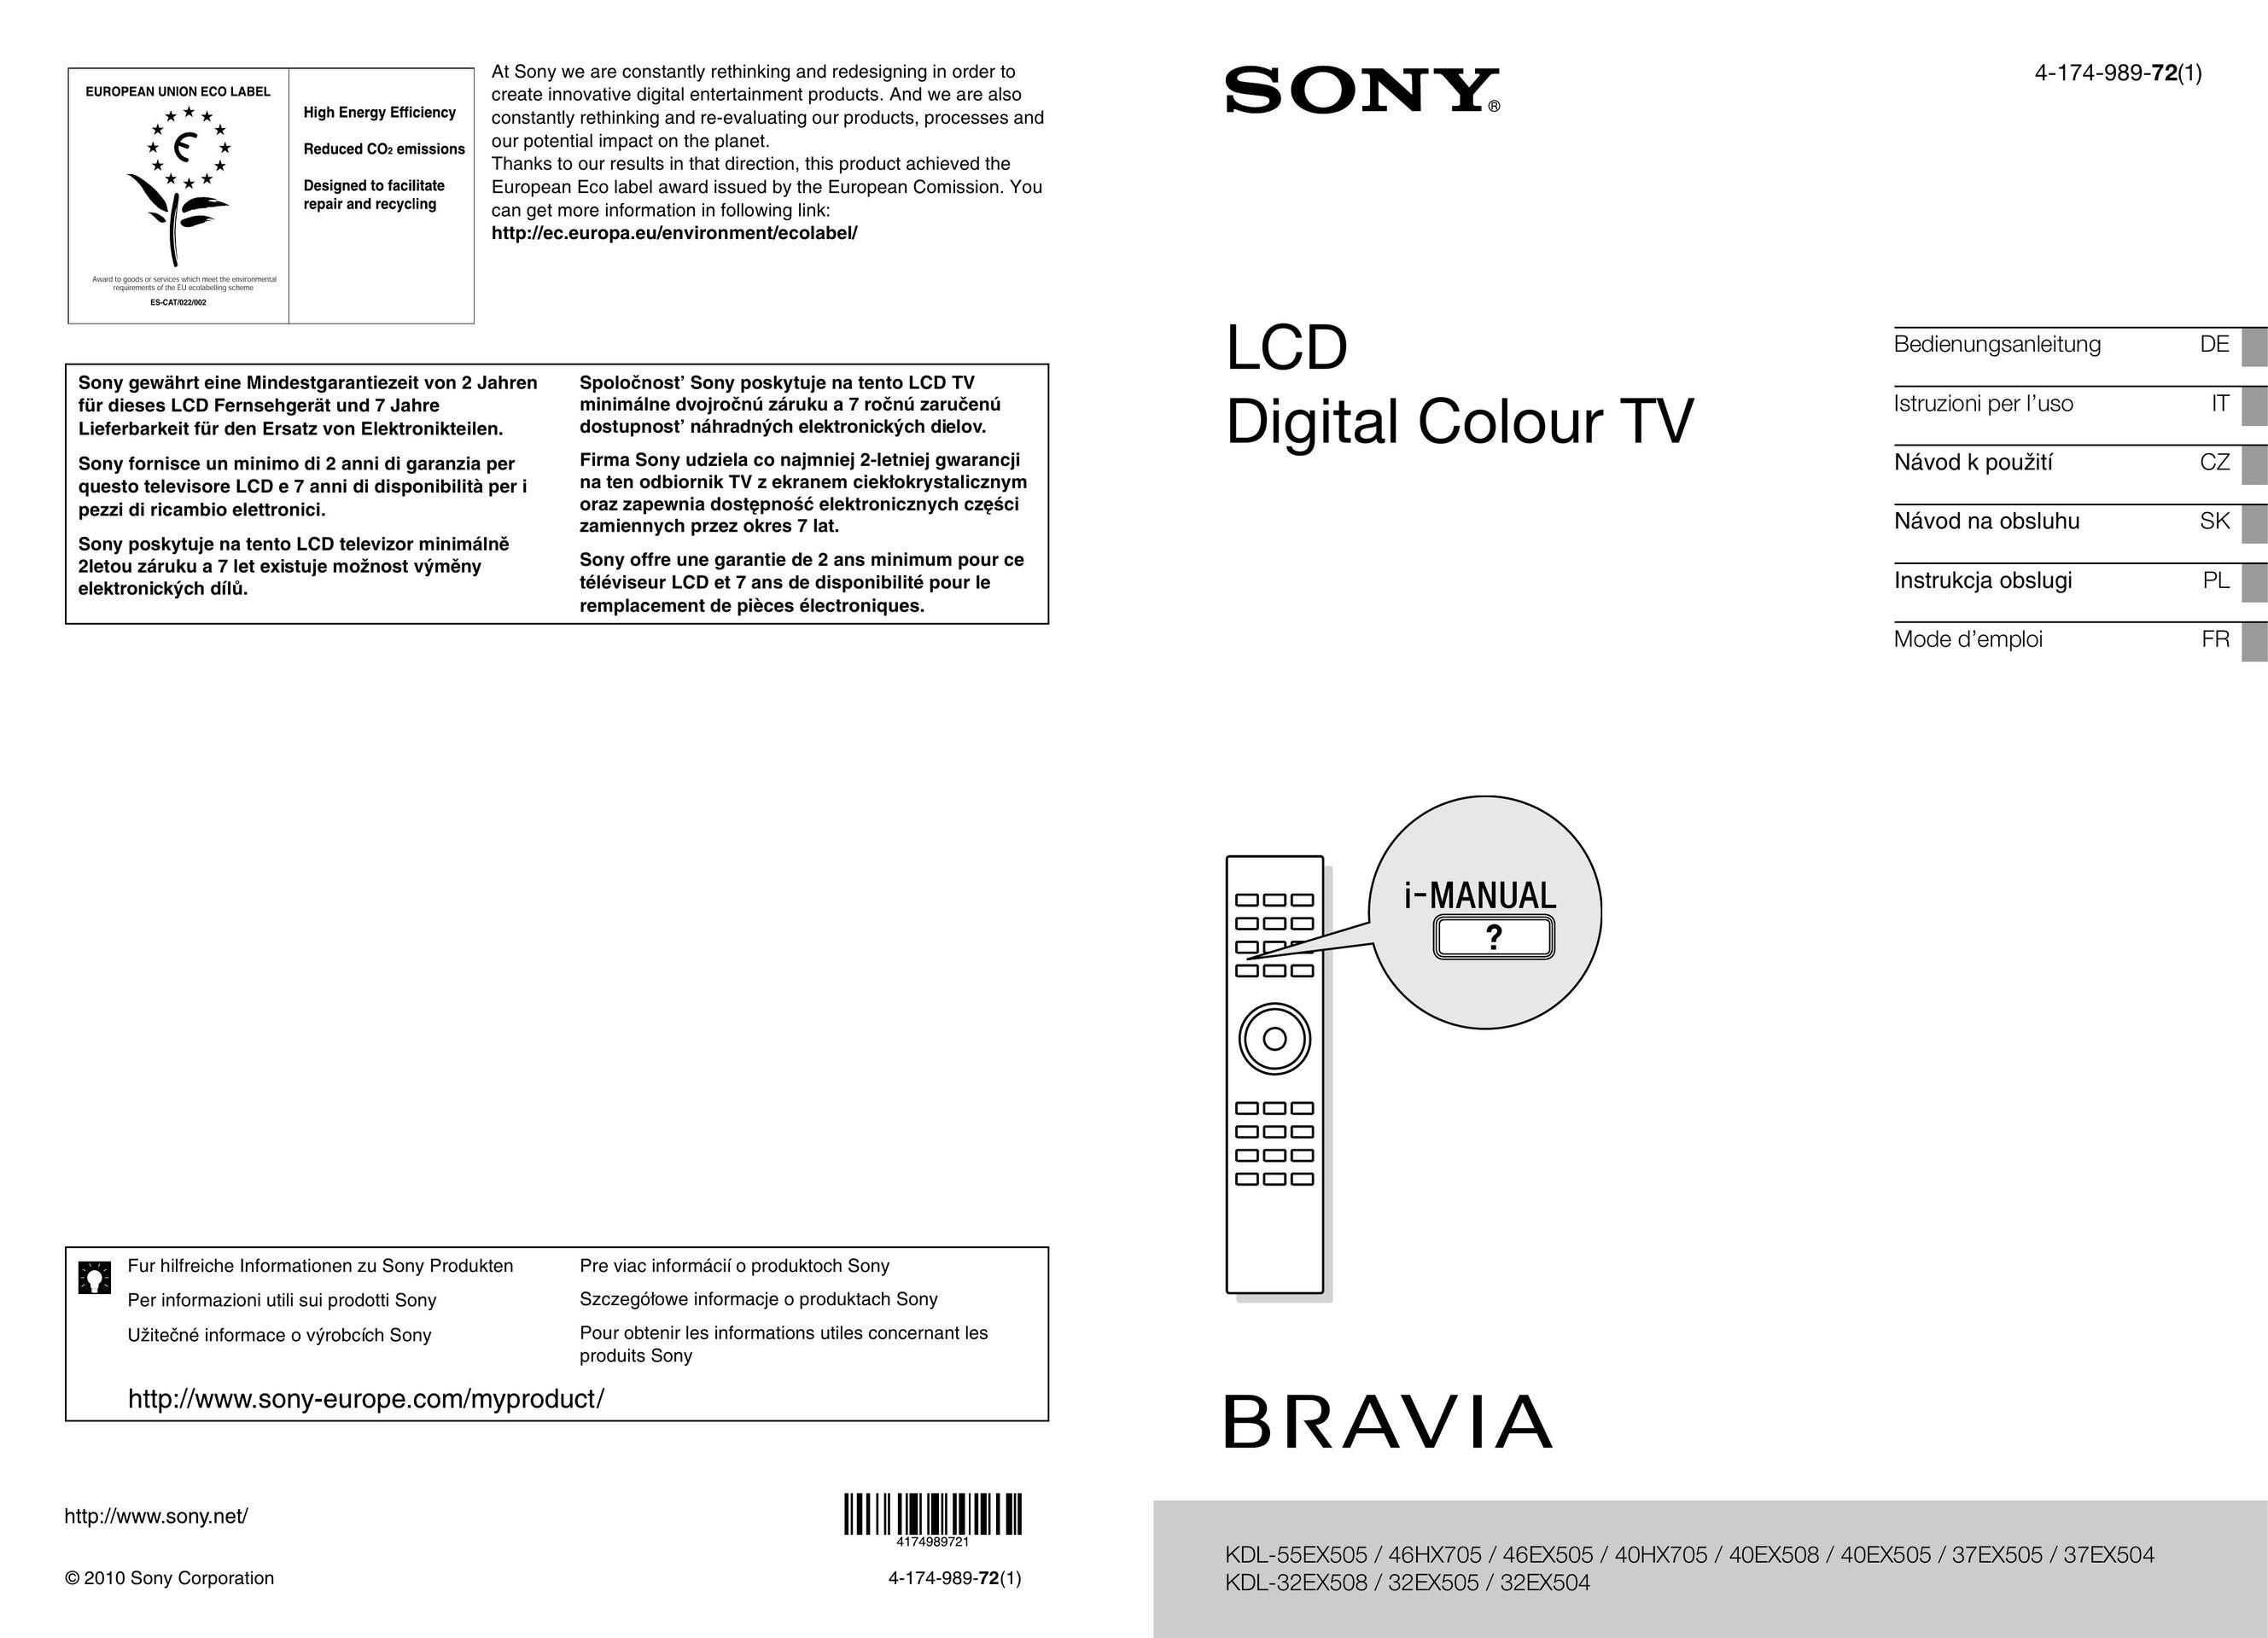 Sony 37EX504 CRT Television User Manual